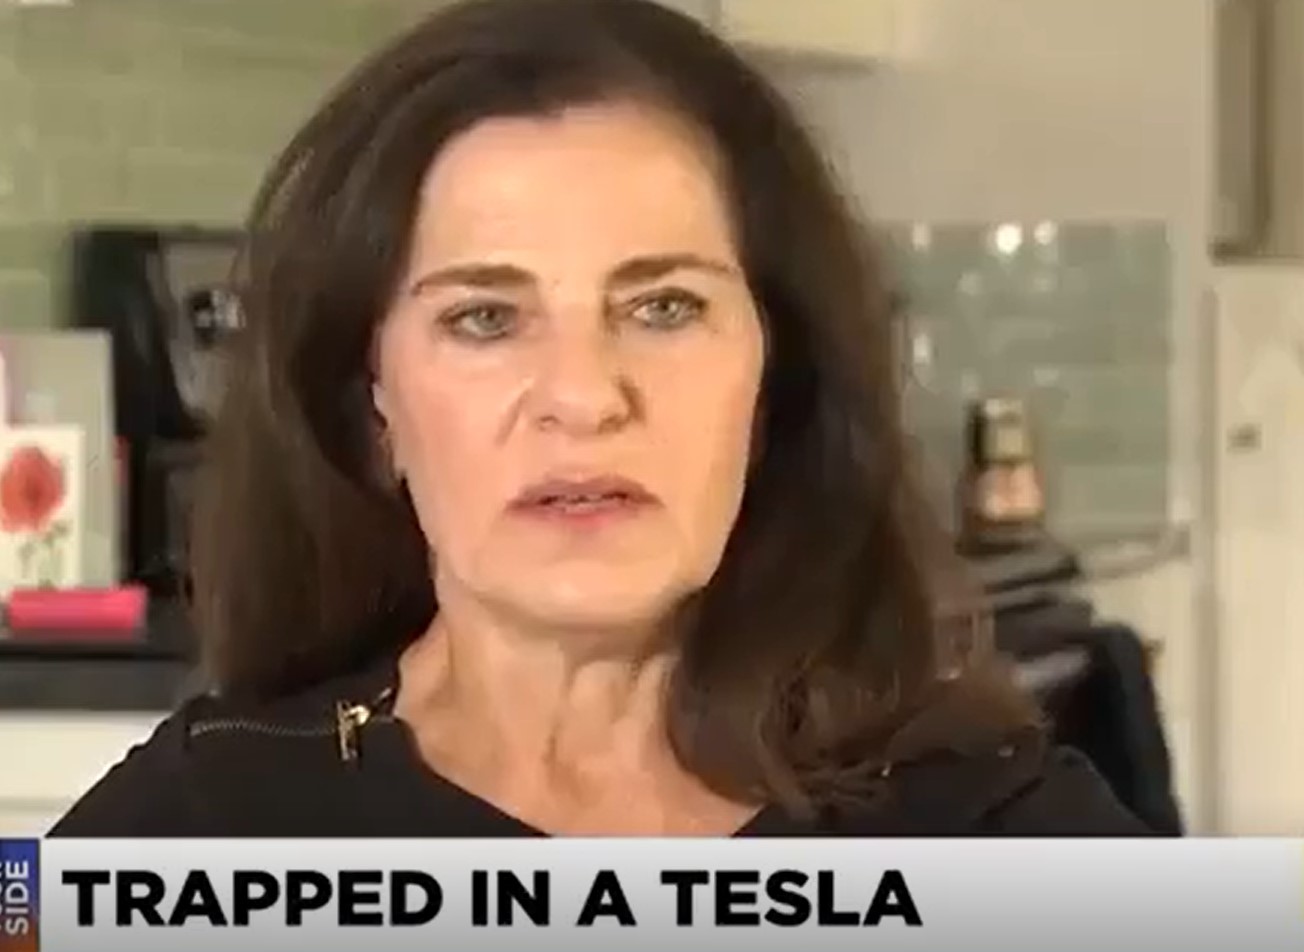 Woman criticizes Elon Musk after being trapped in out-of-battery Tesla 3